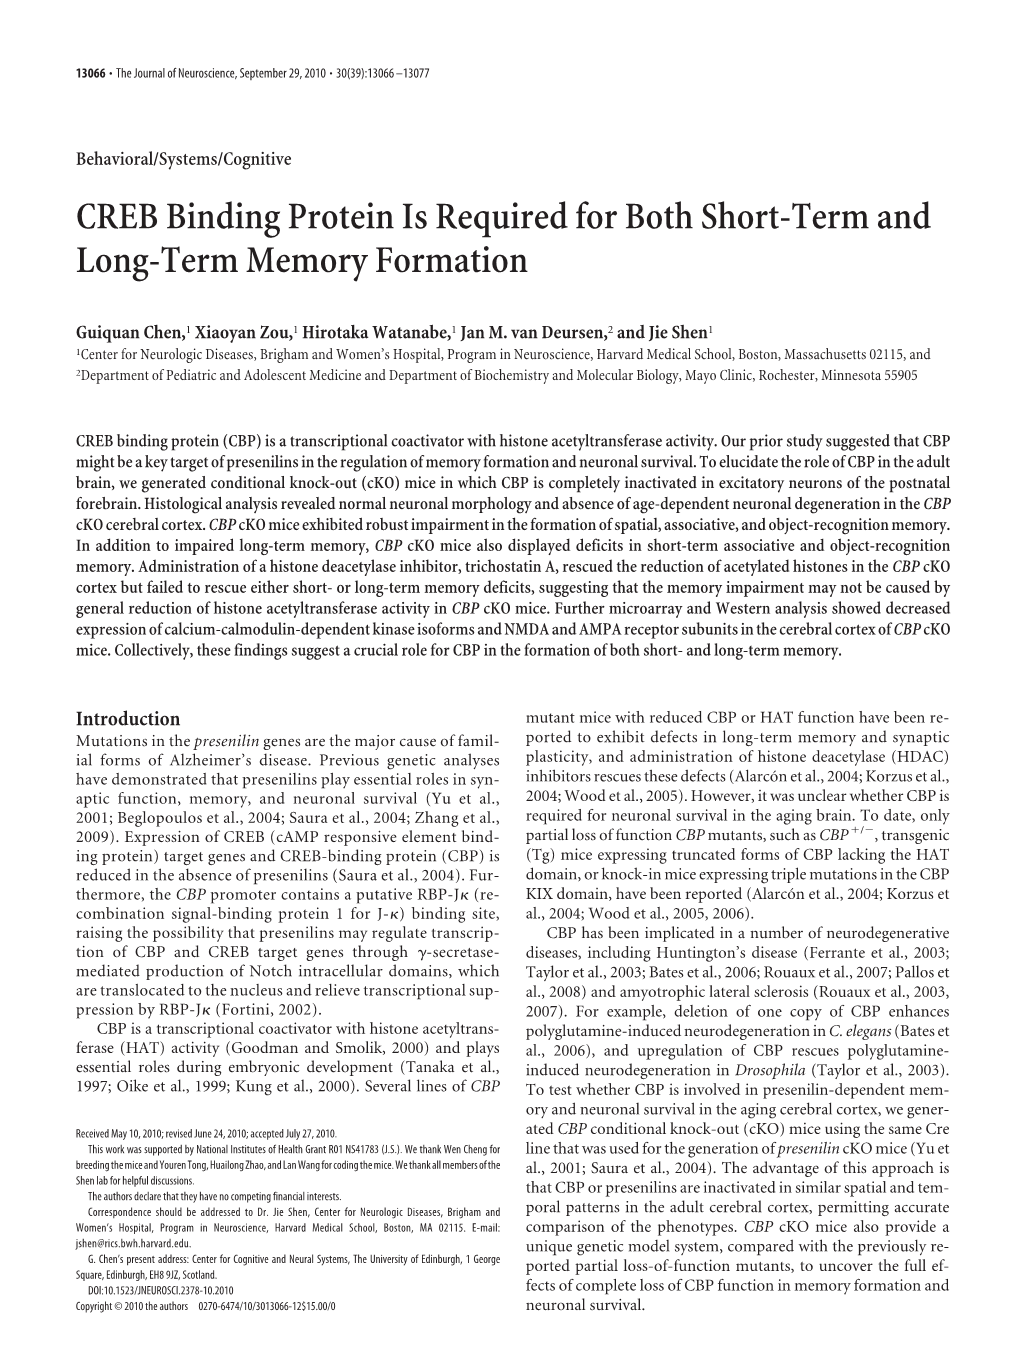 CREB Binding Protein Is Required for Both Short-Term and Long-Term Memory Formation